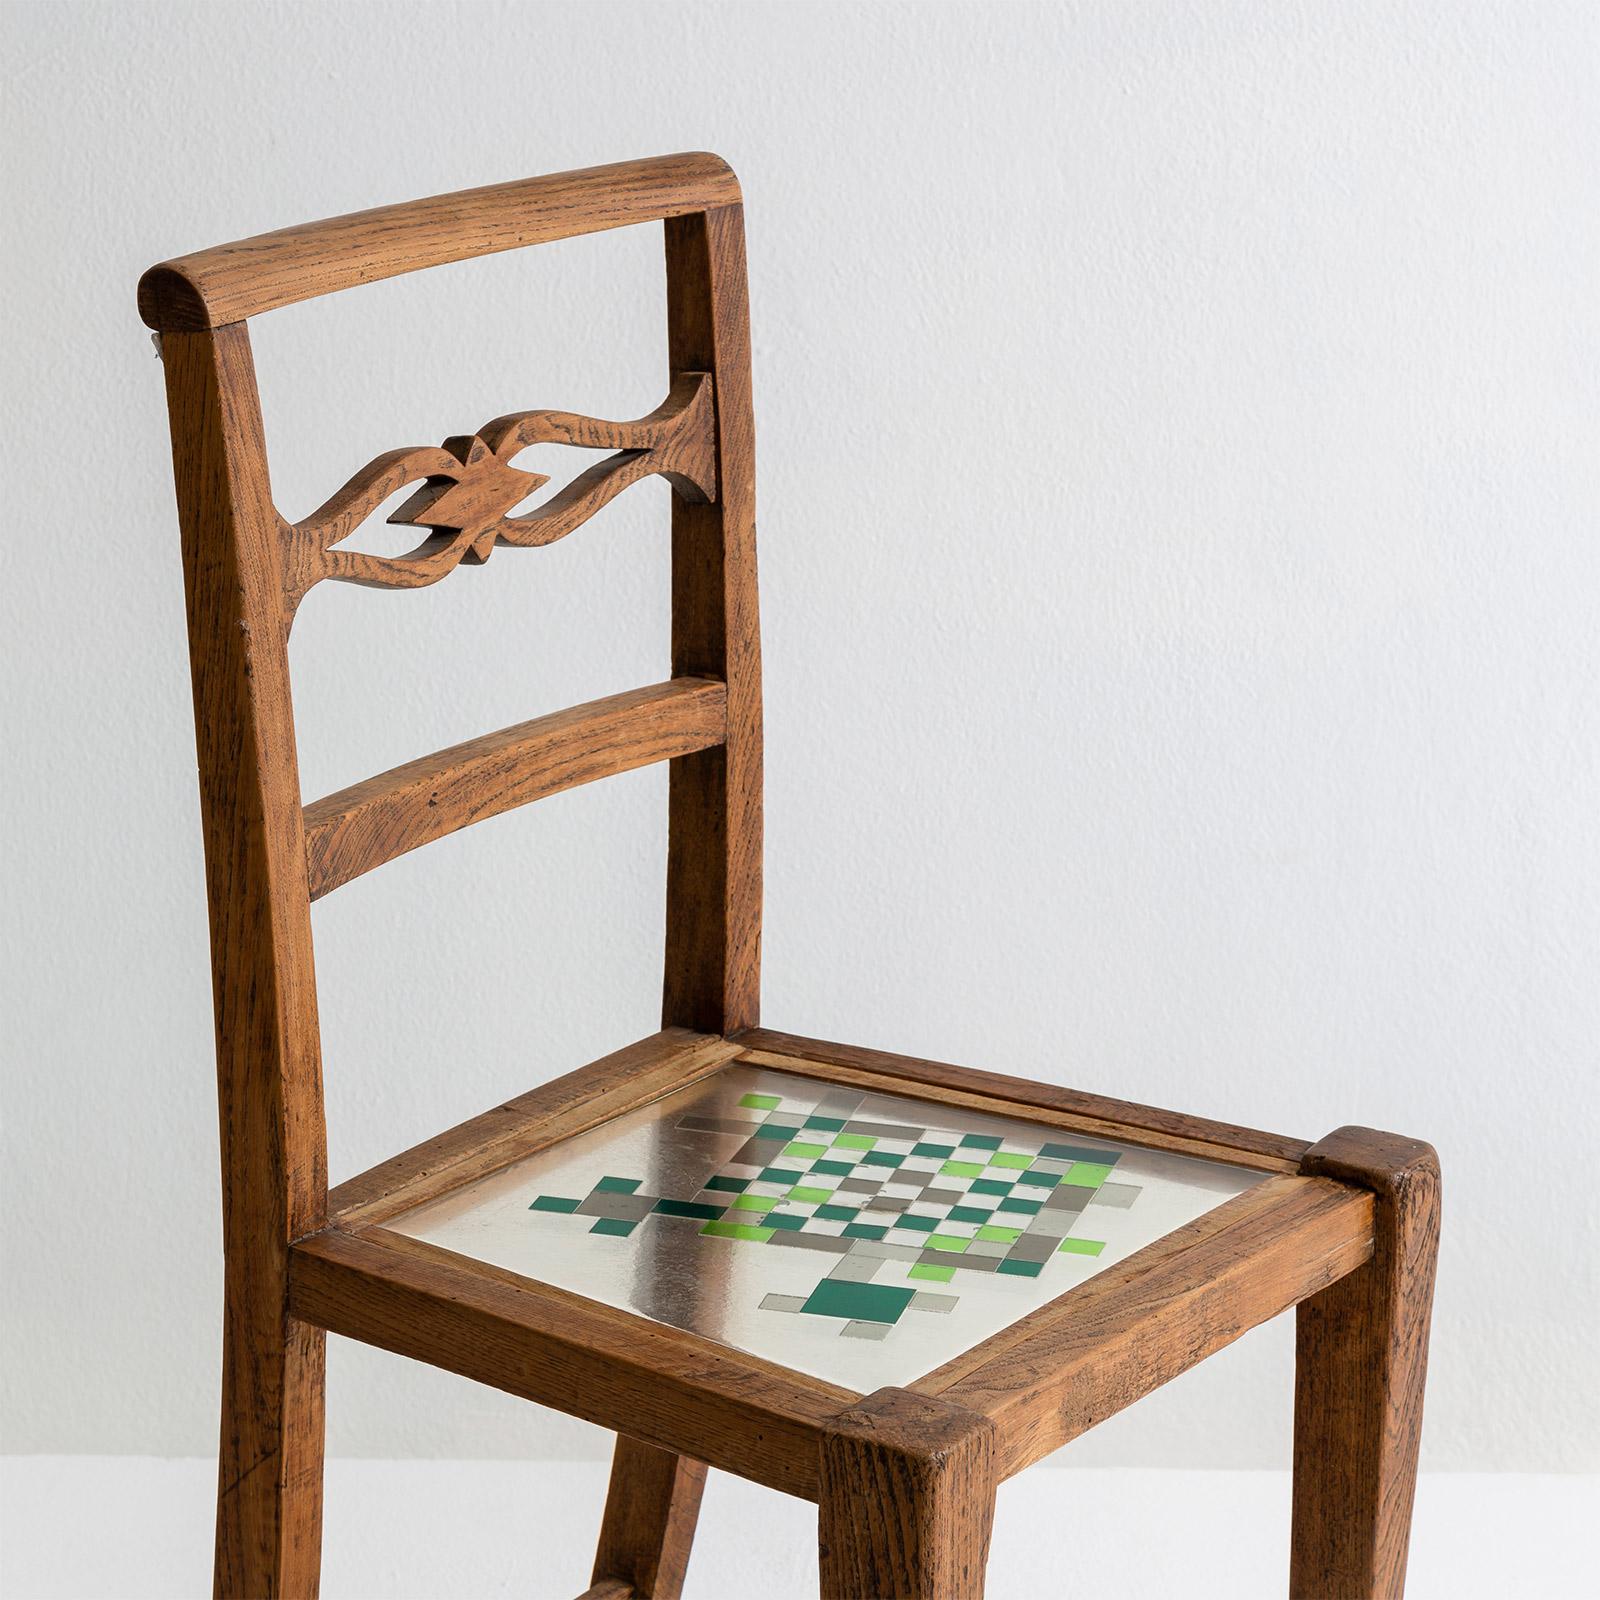 Mosaiced Chair in Chestnut Wood with Mosaic Seat by Hillsideout For Sale 2